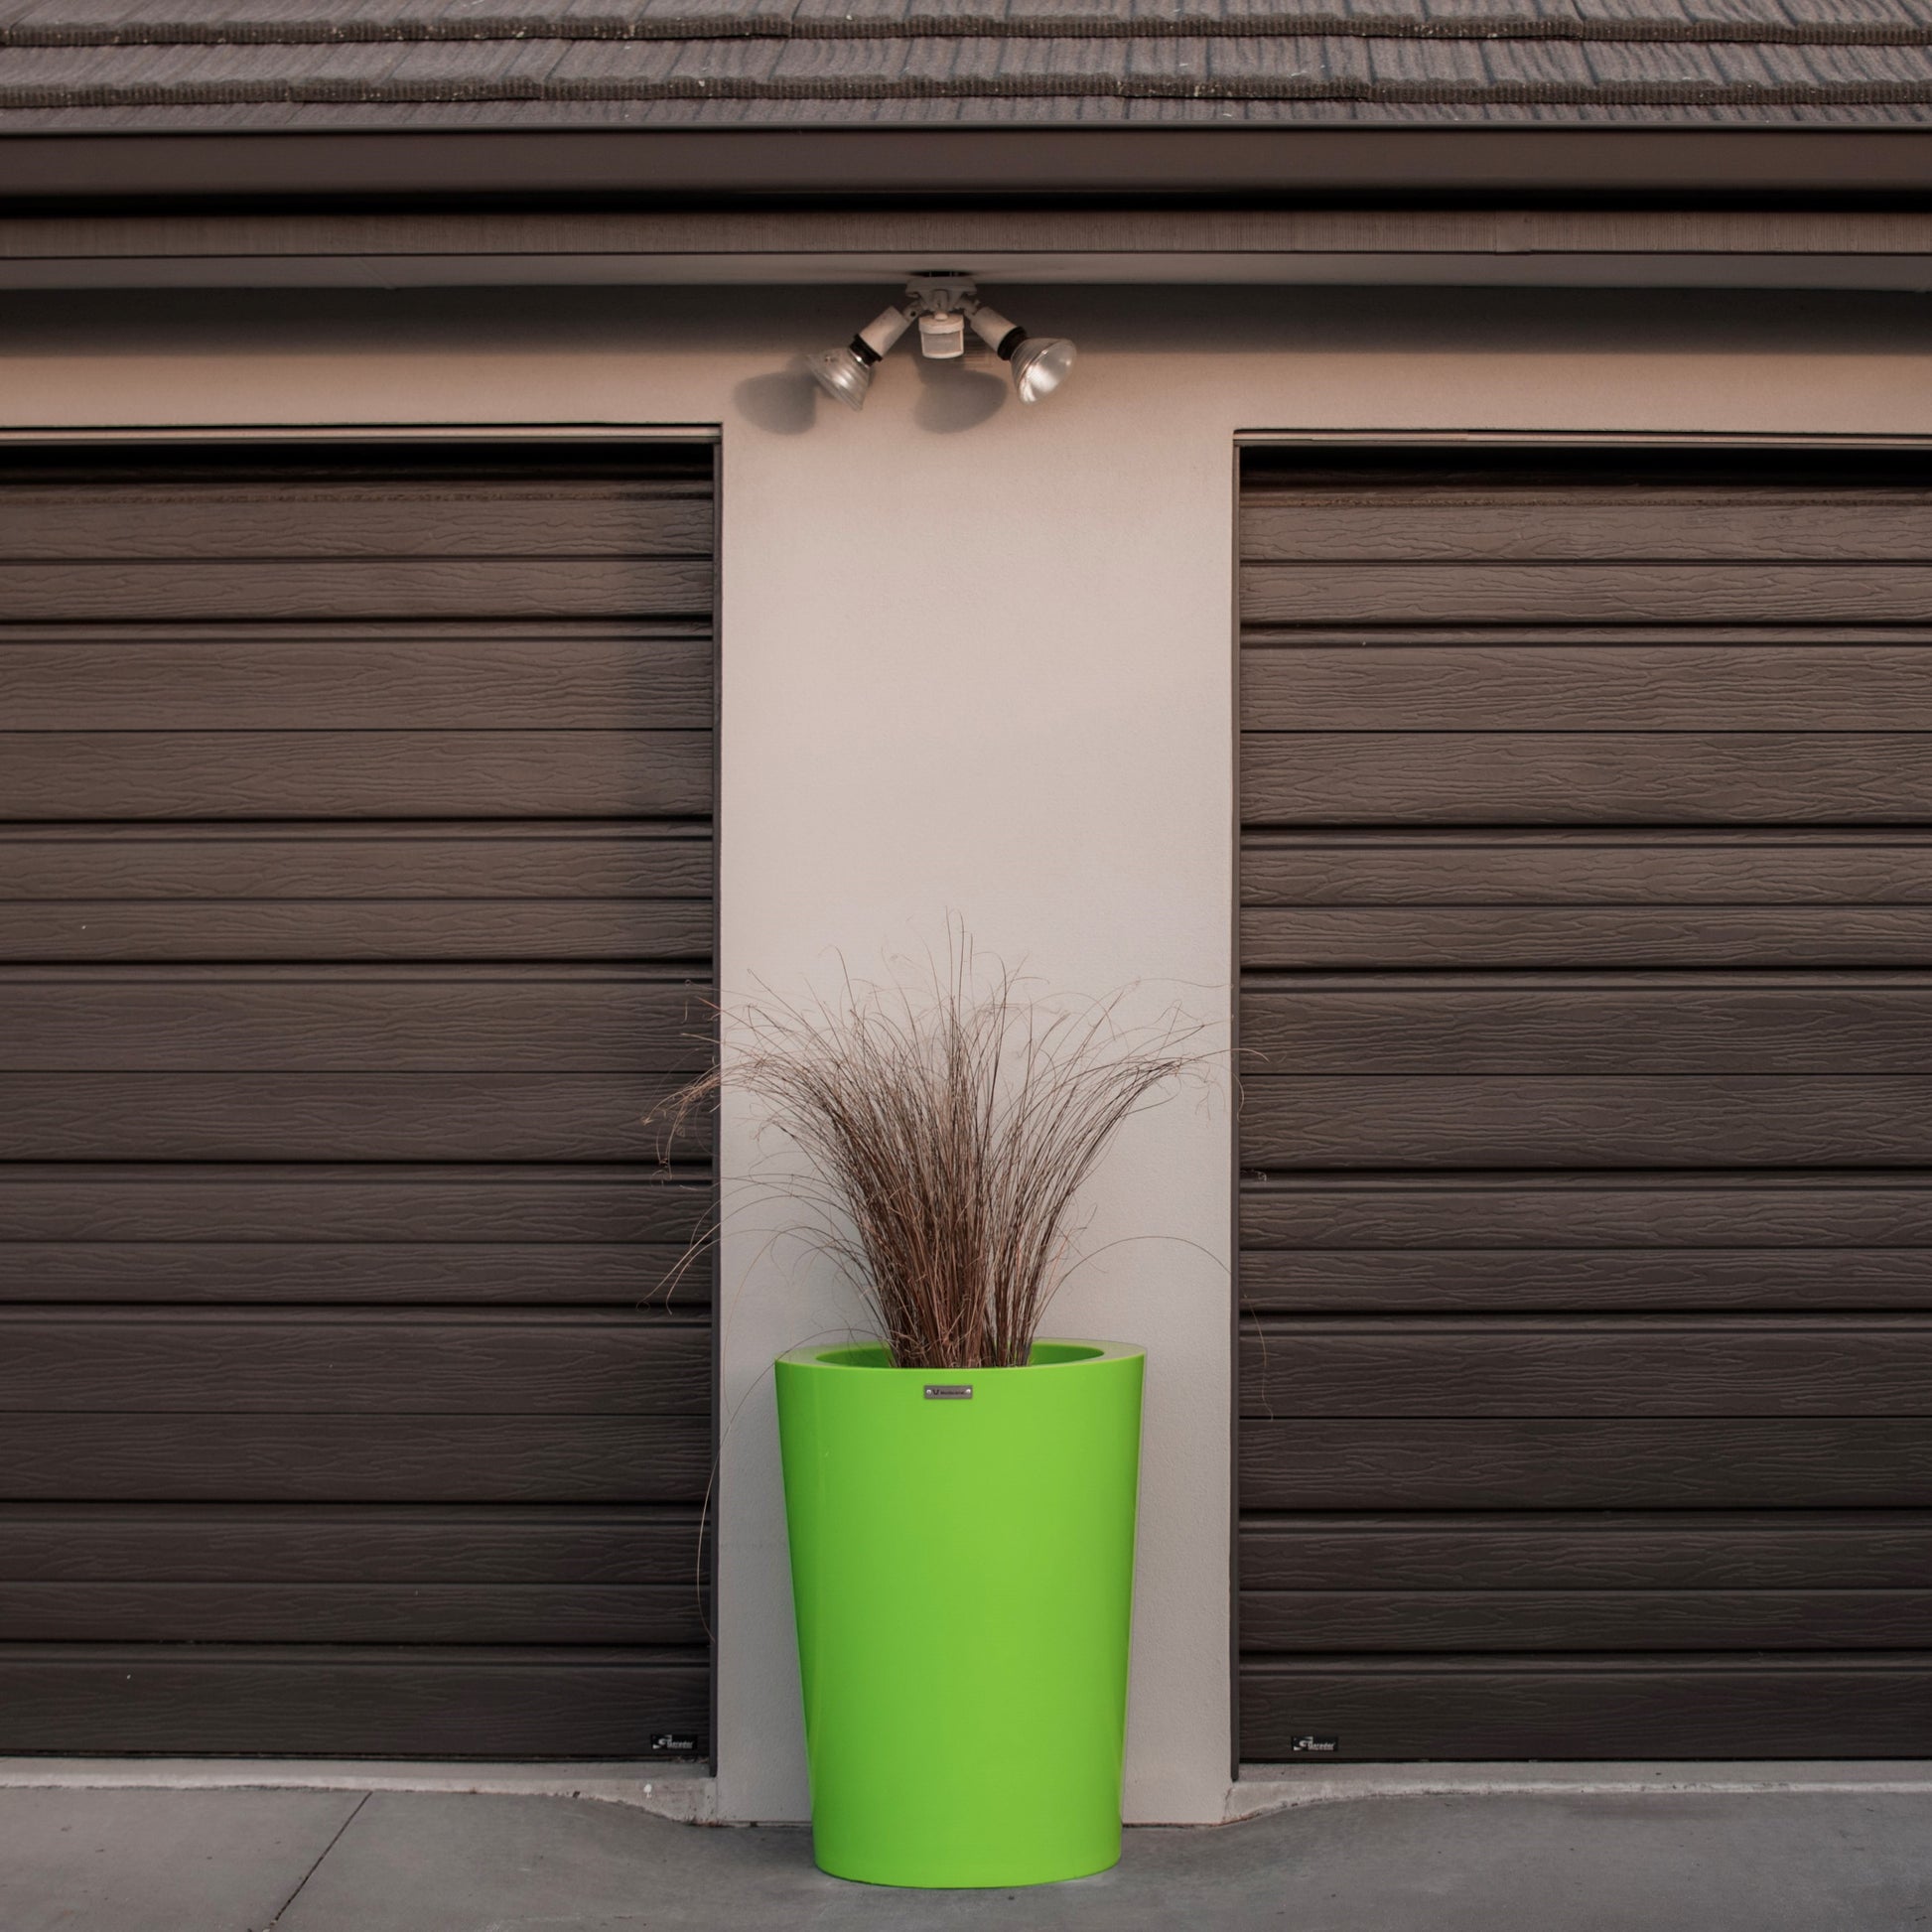 Milan 770 Planter in Lime Green. Lime green pot plant.